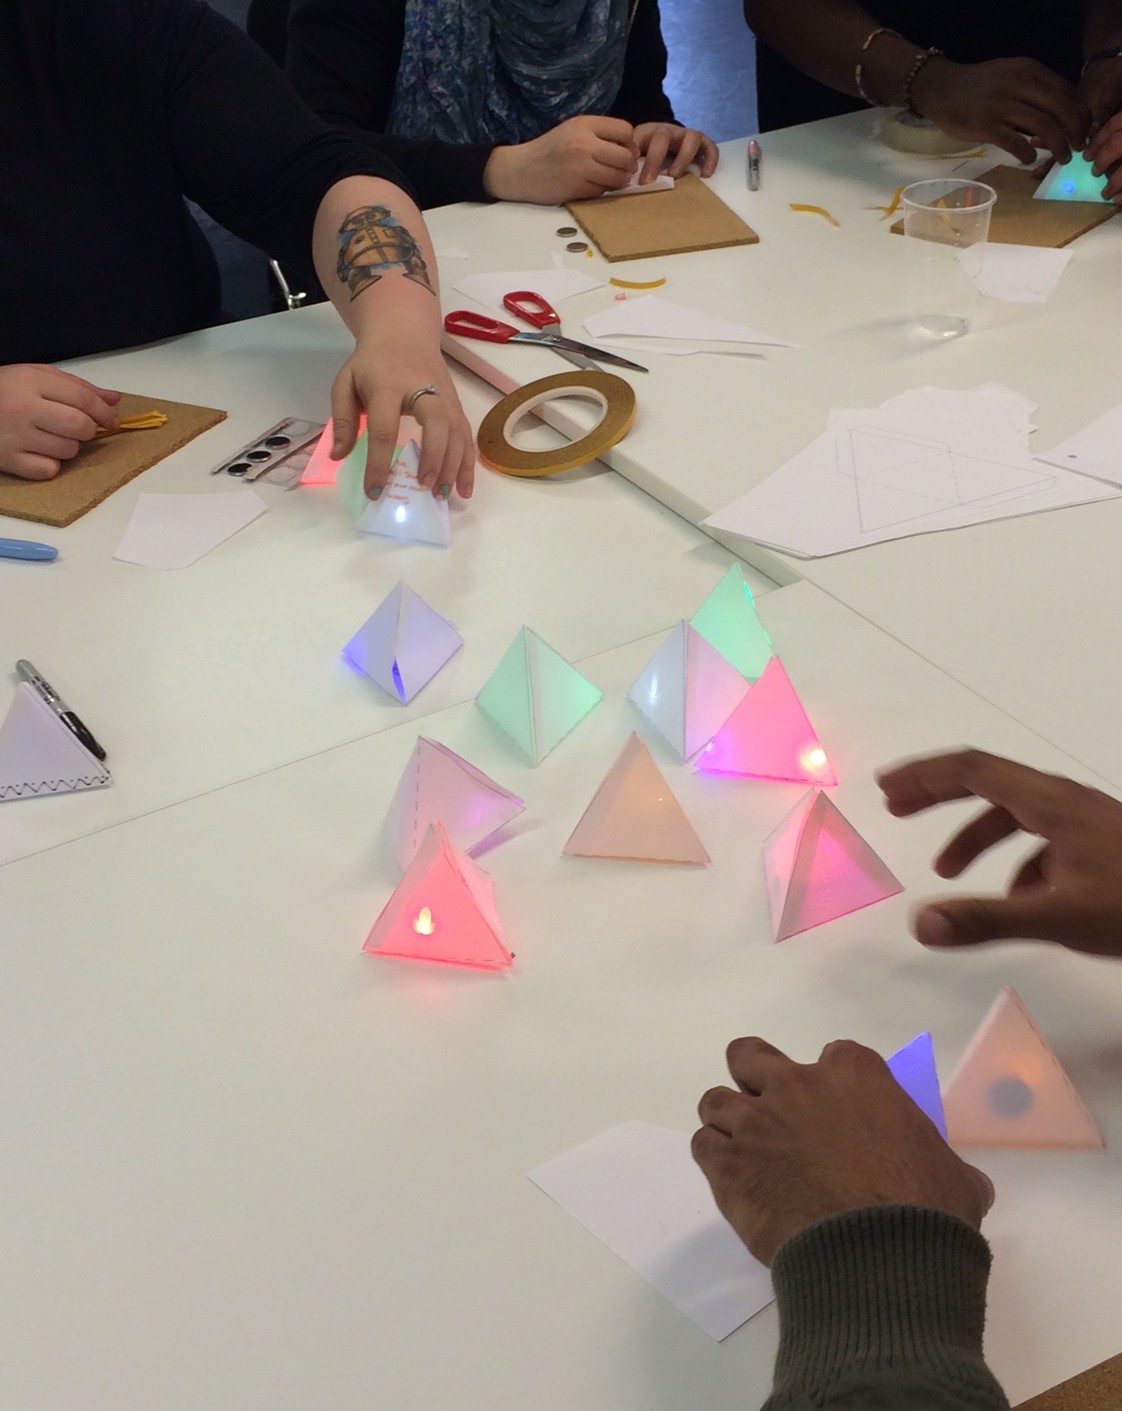 The group are placing their colourful light up paper pyramids in the centre of the table.